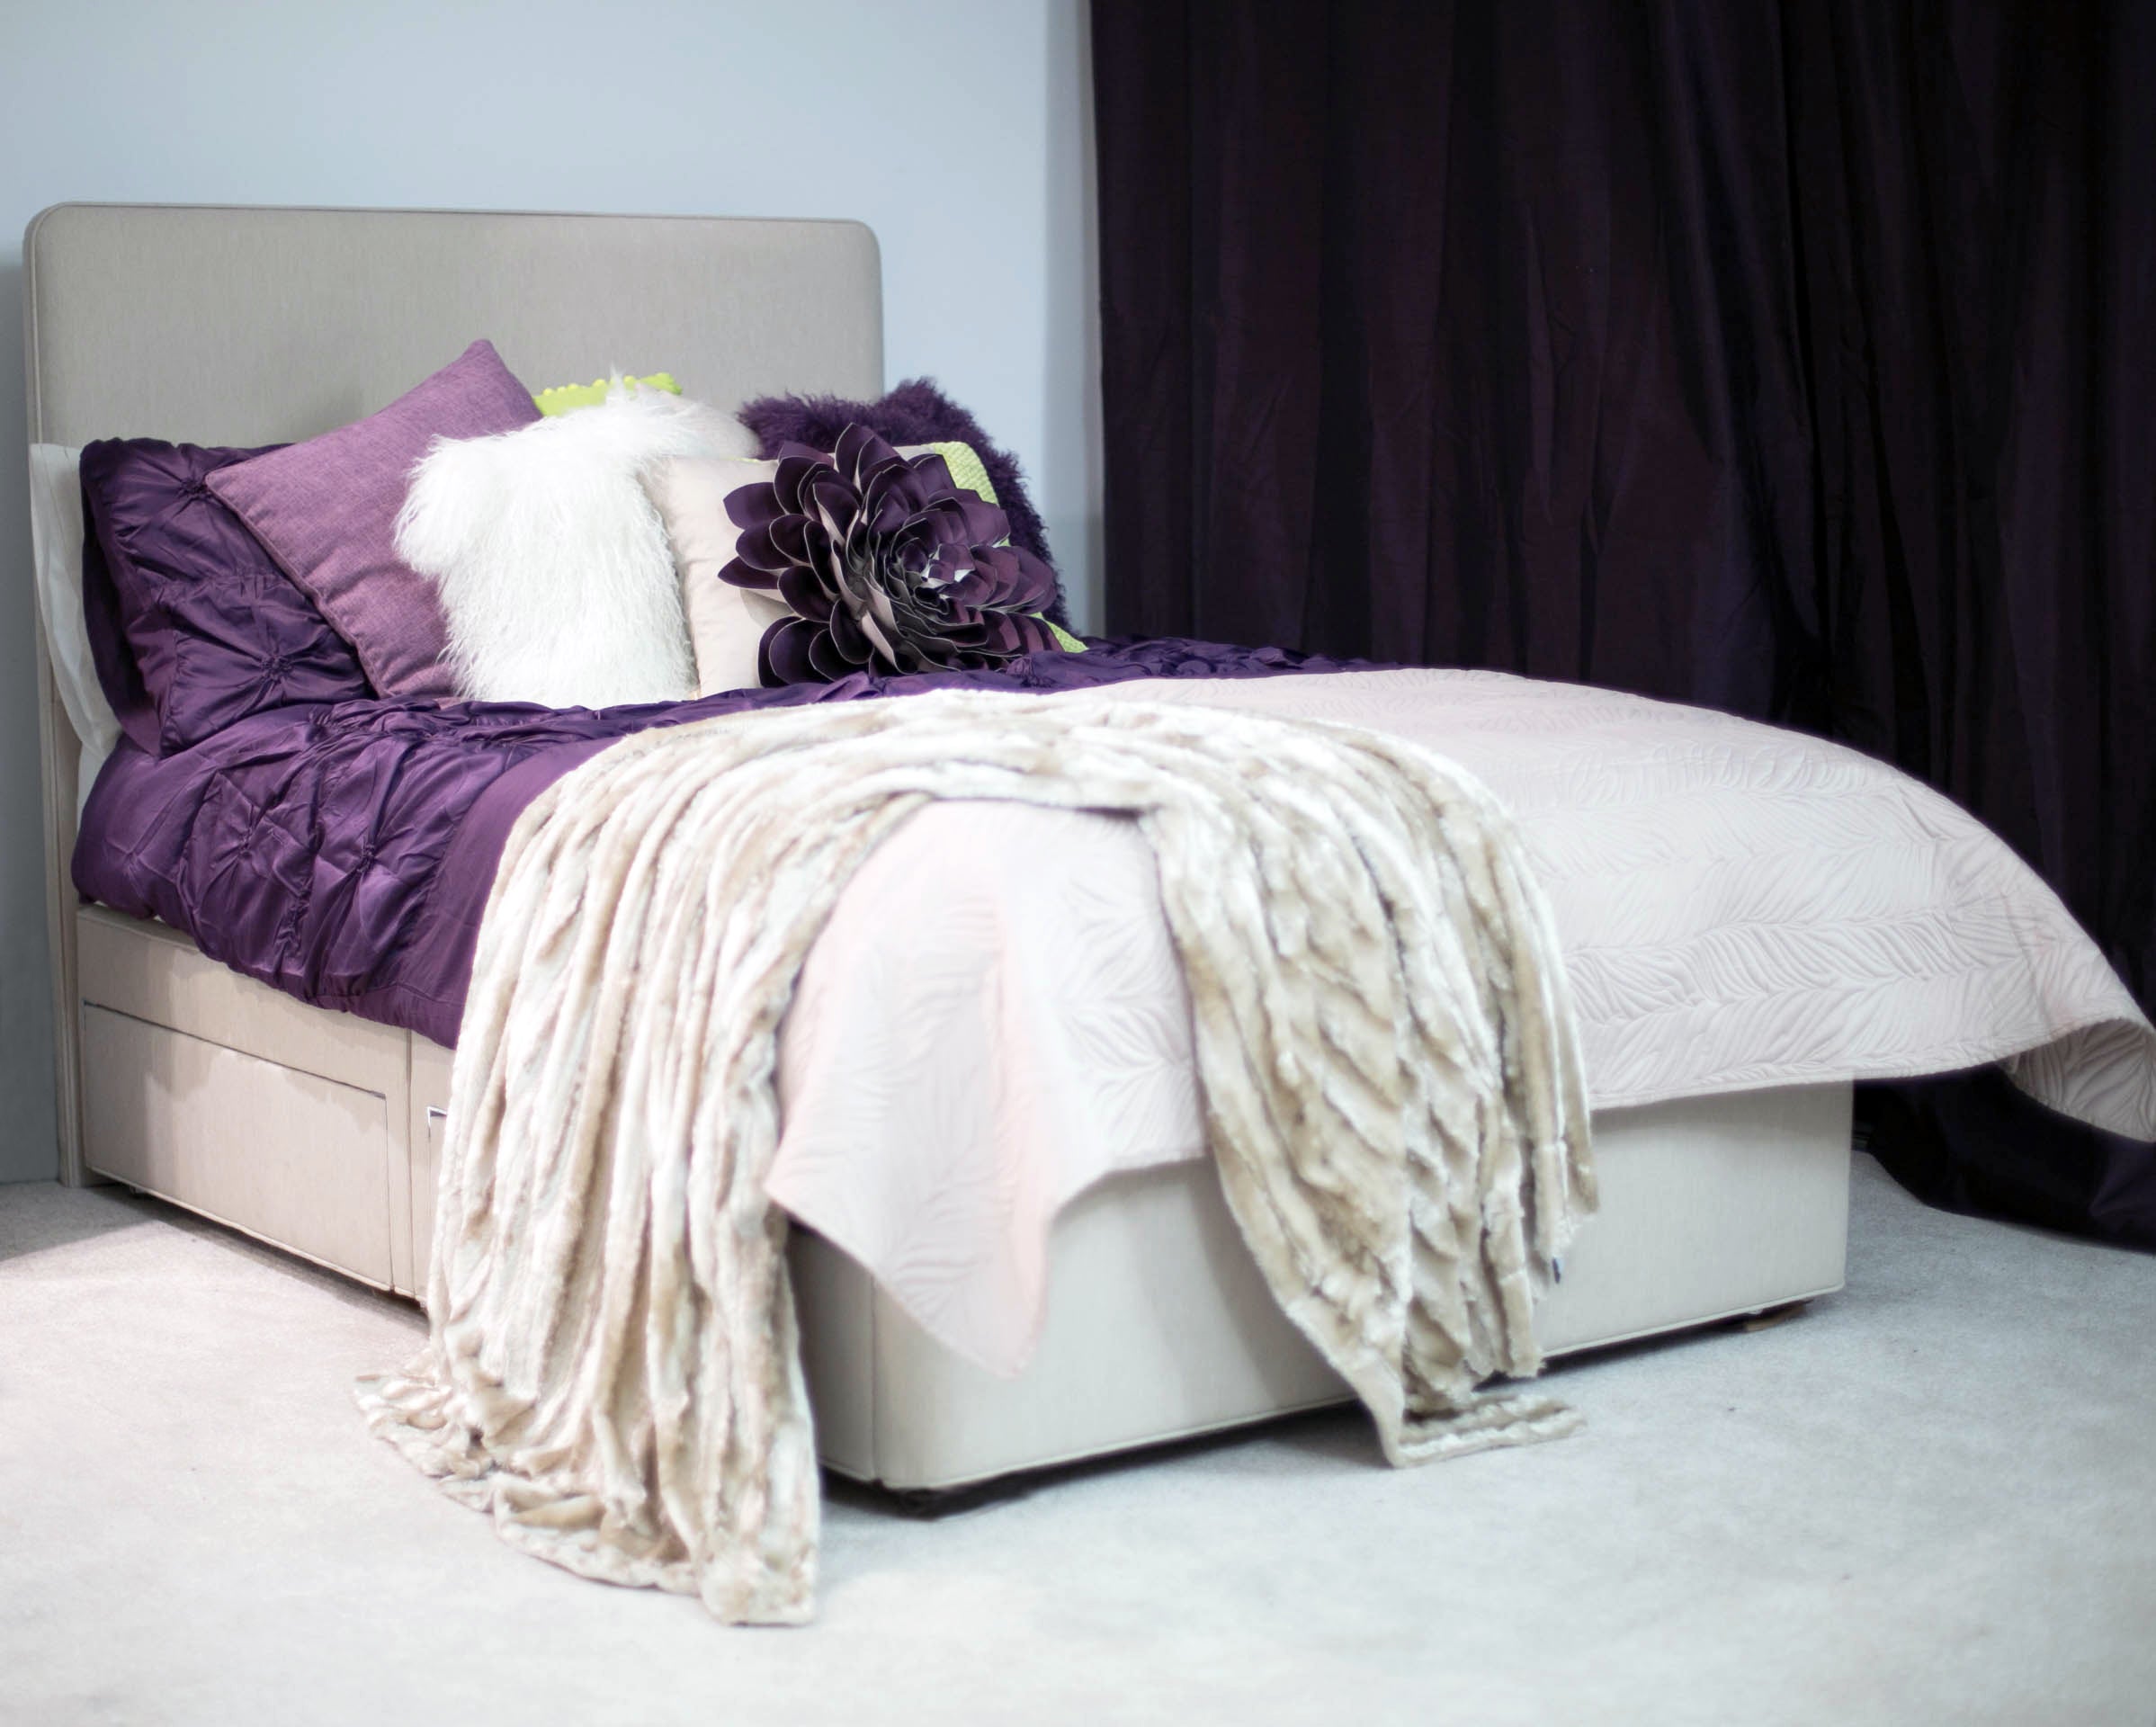 Dressed to impress: purple, green and cream bedding translates neatly between the season